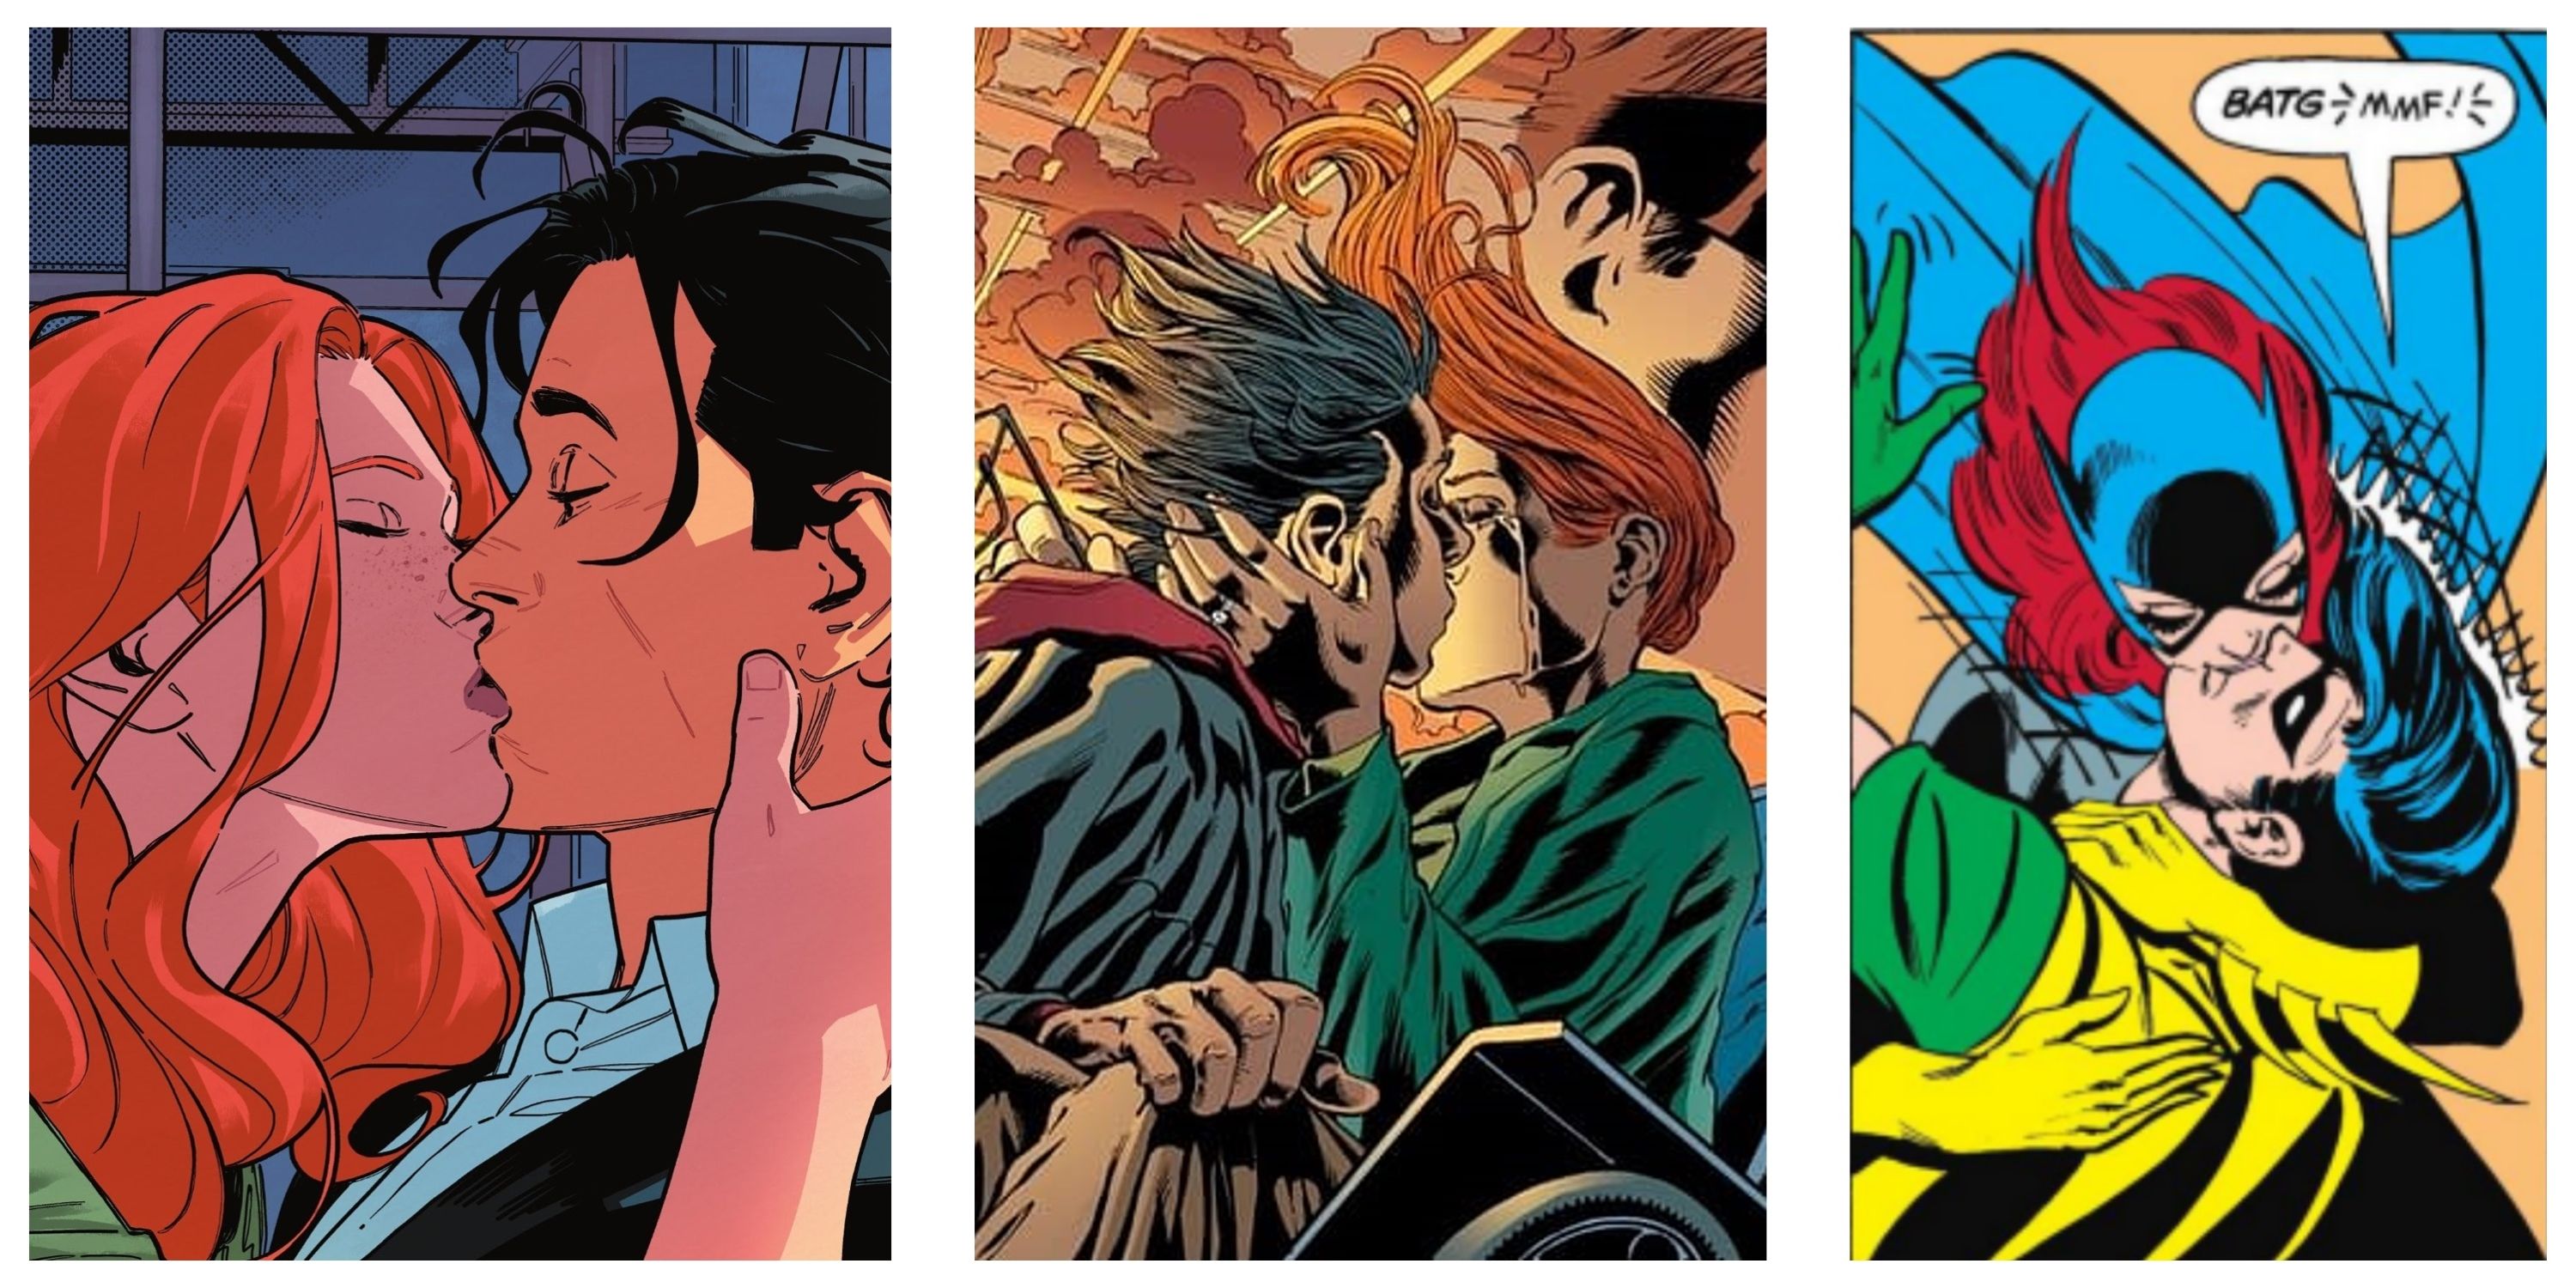 Composite Image of Nightwing and Batgirl kissing in DC Comics